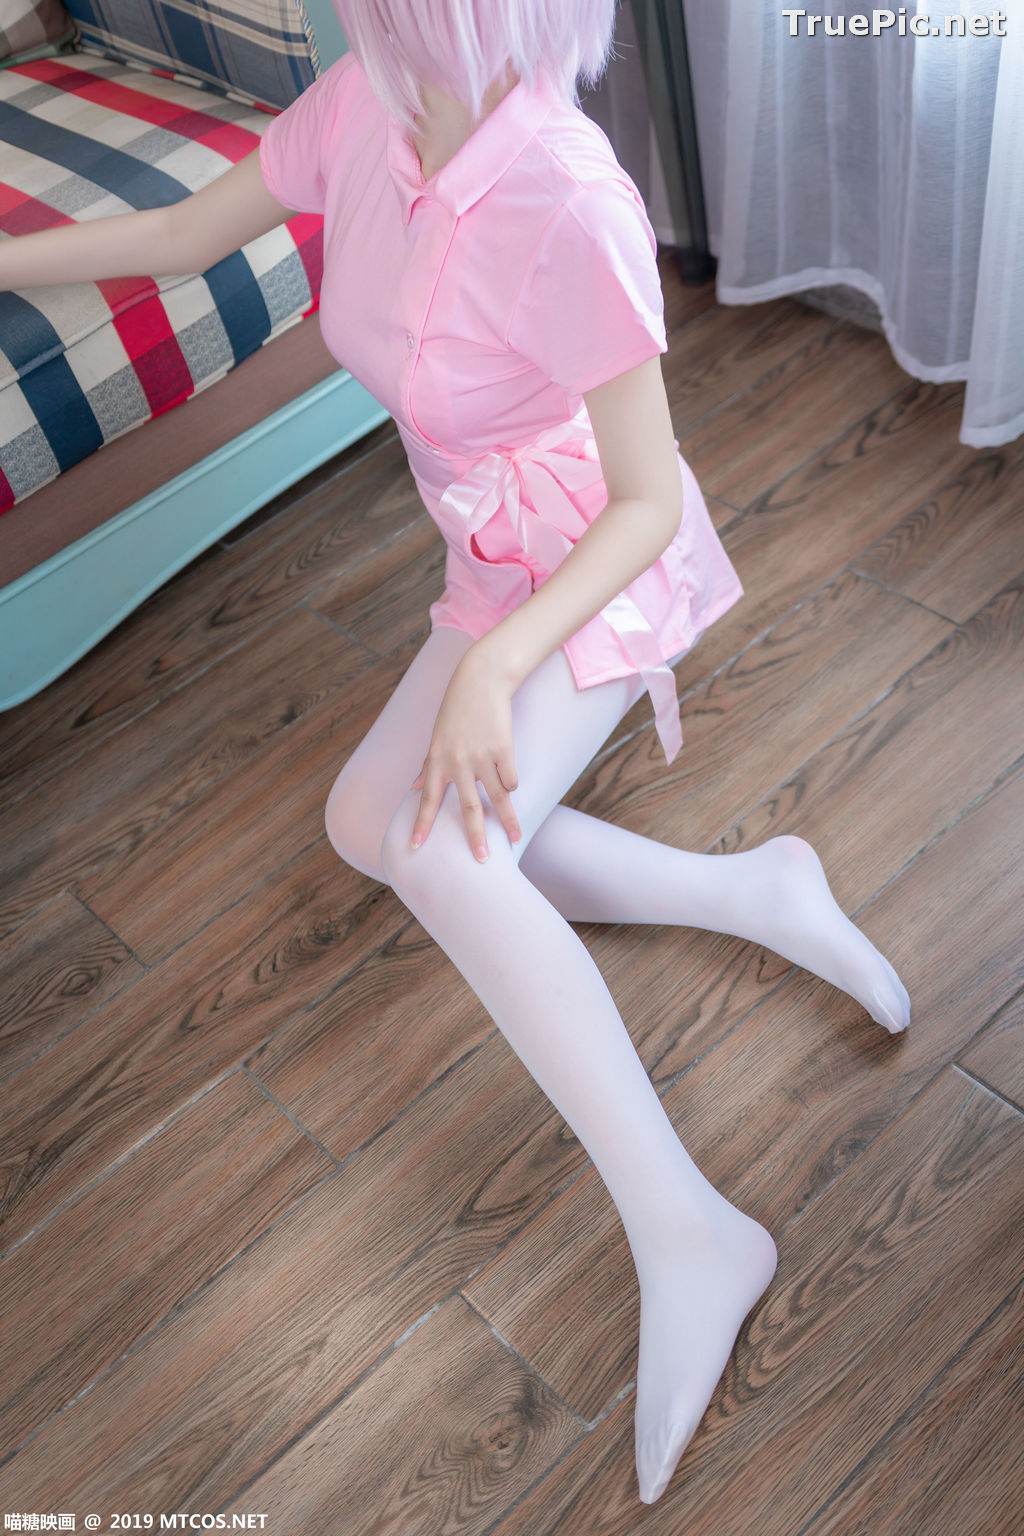 Image [MTCos] 喵糖映画 Vol.033 – Chinese Cute Model - Pink Nurse Cosplay - TruePic.net - Picture-15